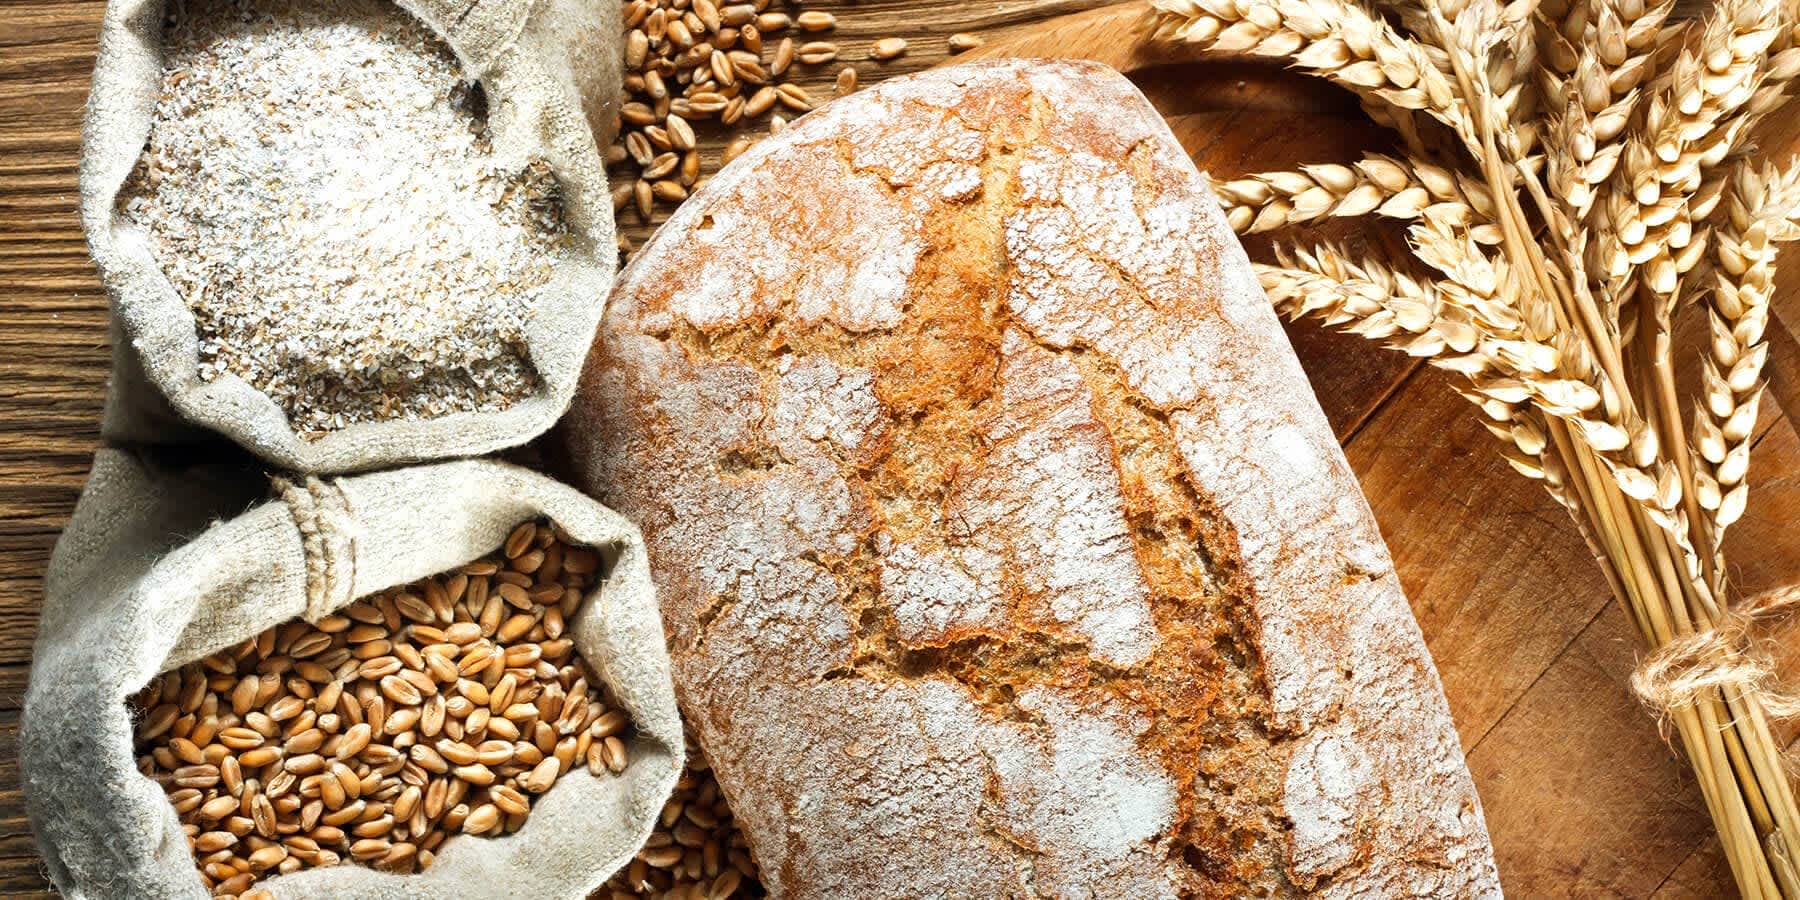 A loaf of bread next to a variety of grains on a table